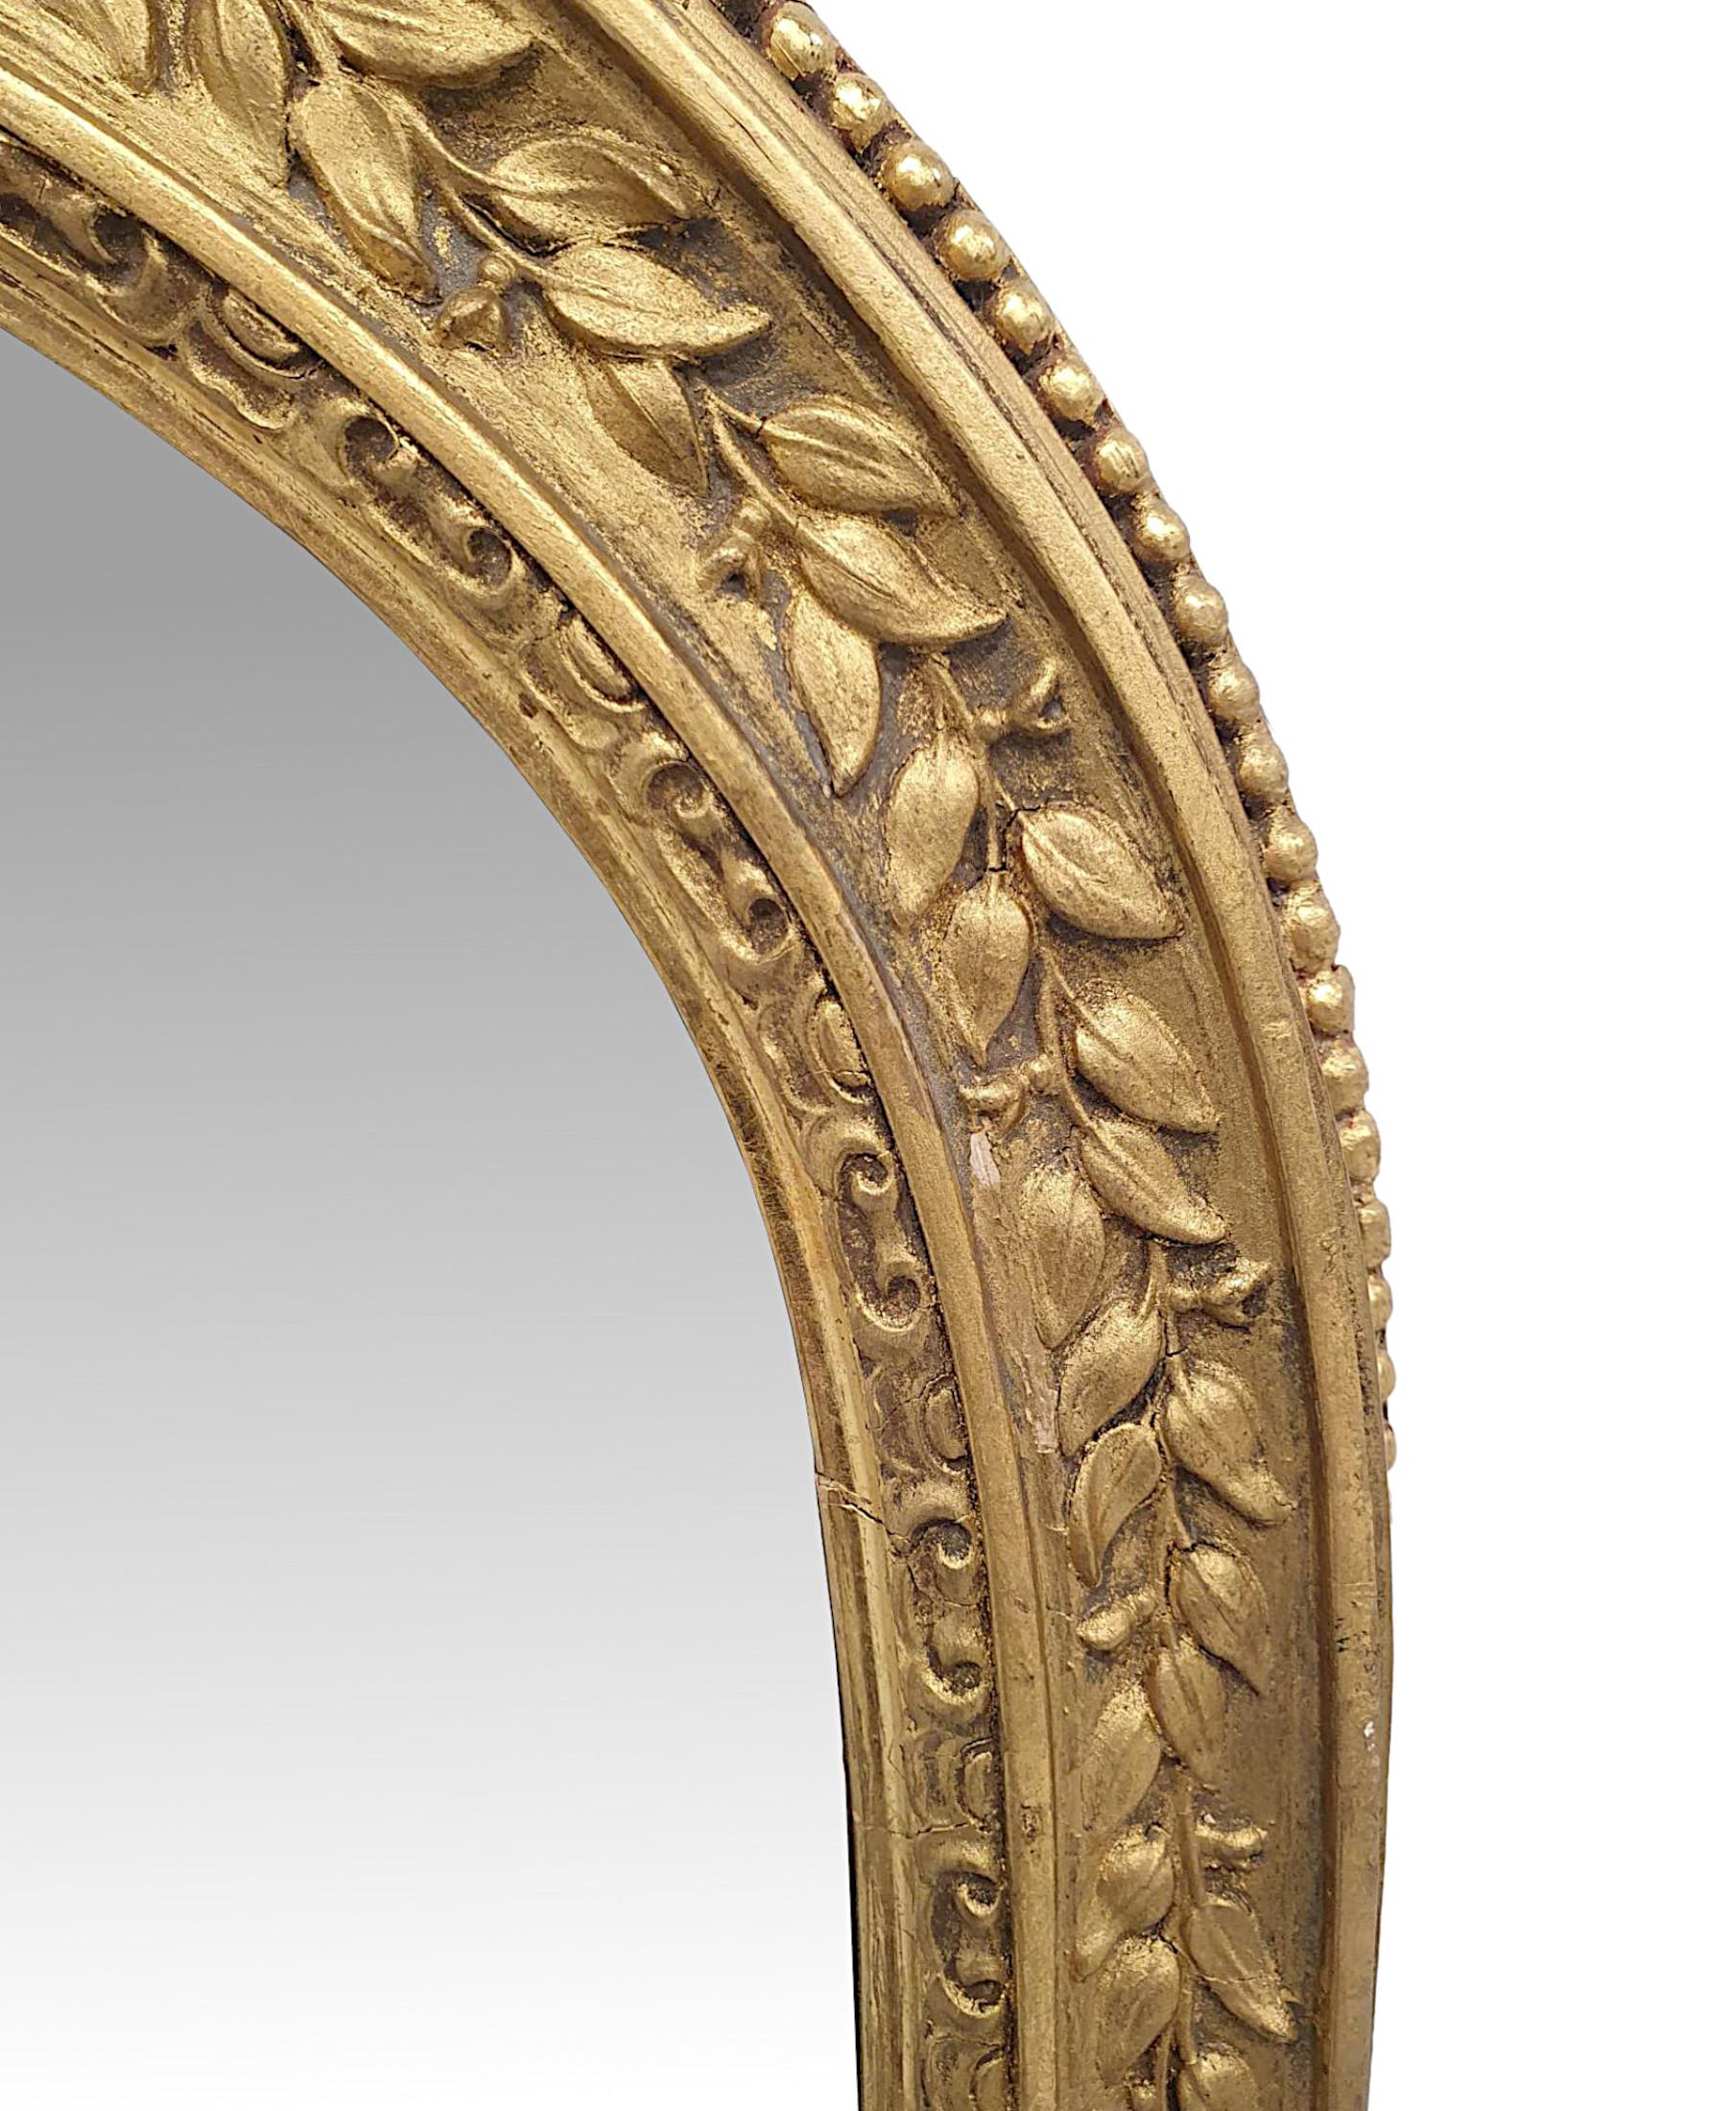 A very rare 19th Century giltwood dressing or pier mirror of narrow and tall proportions and exceptional quality.  The mirror glass plate is set within a finely hand carved, moulded and fluted giltwood frame with fabulous motif detail comprising of